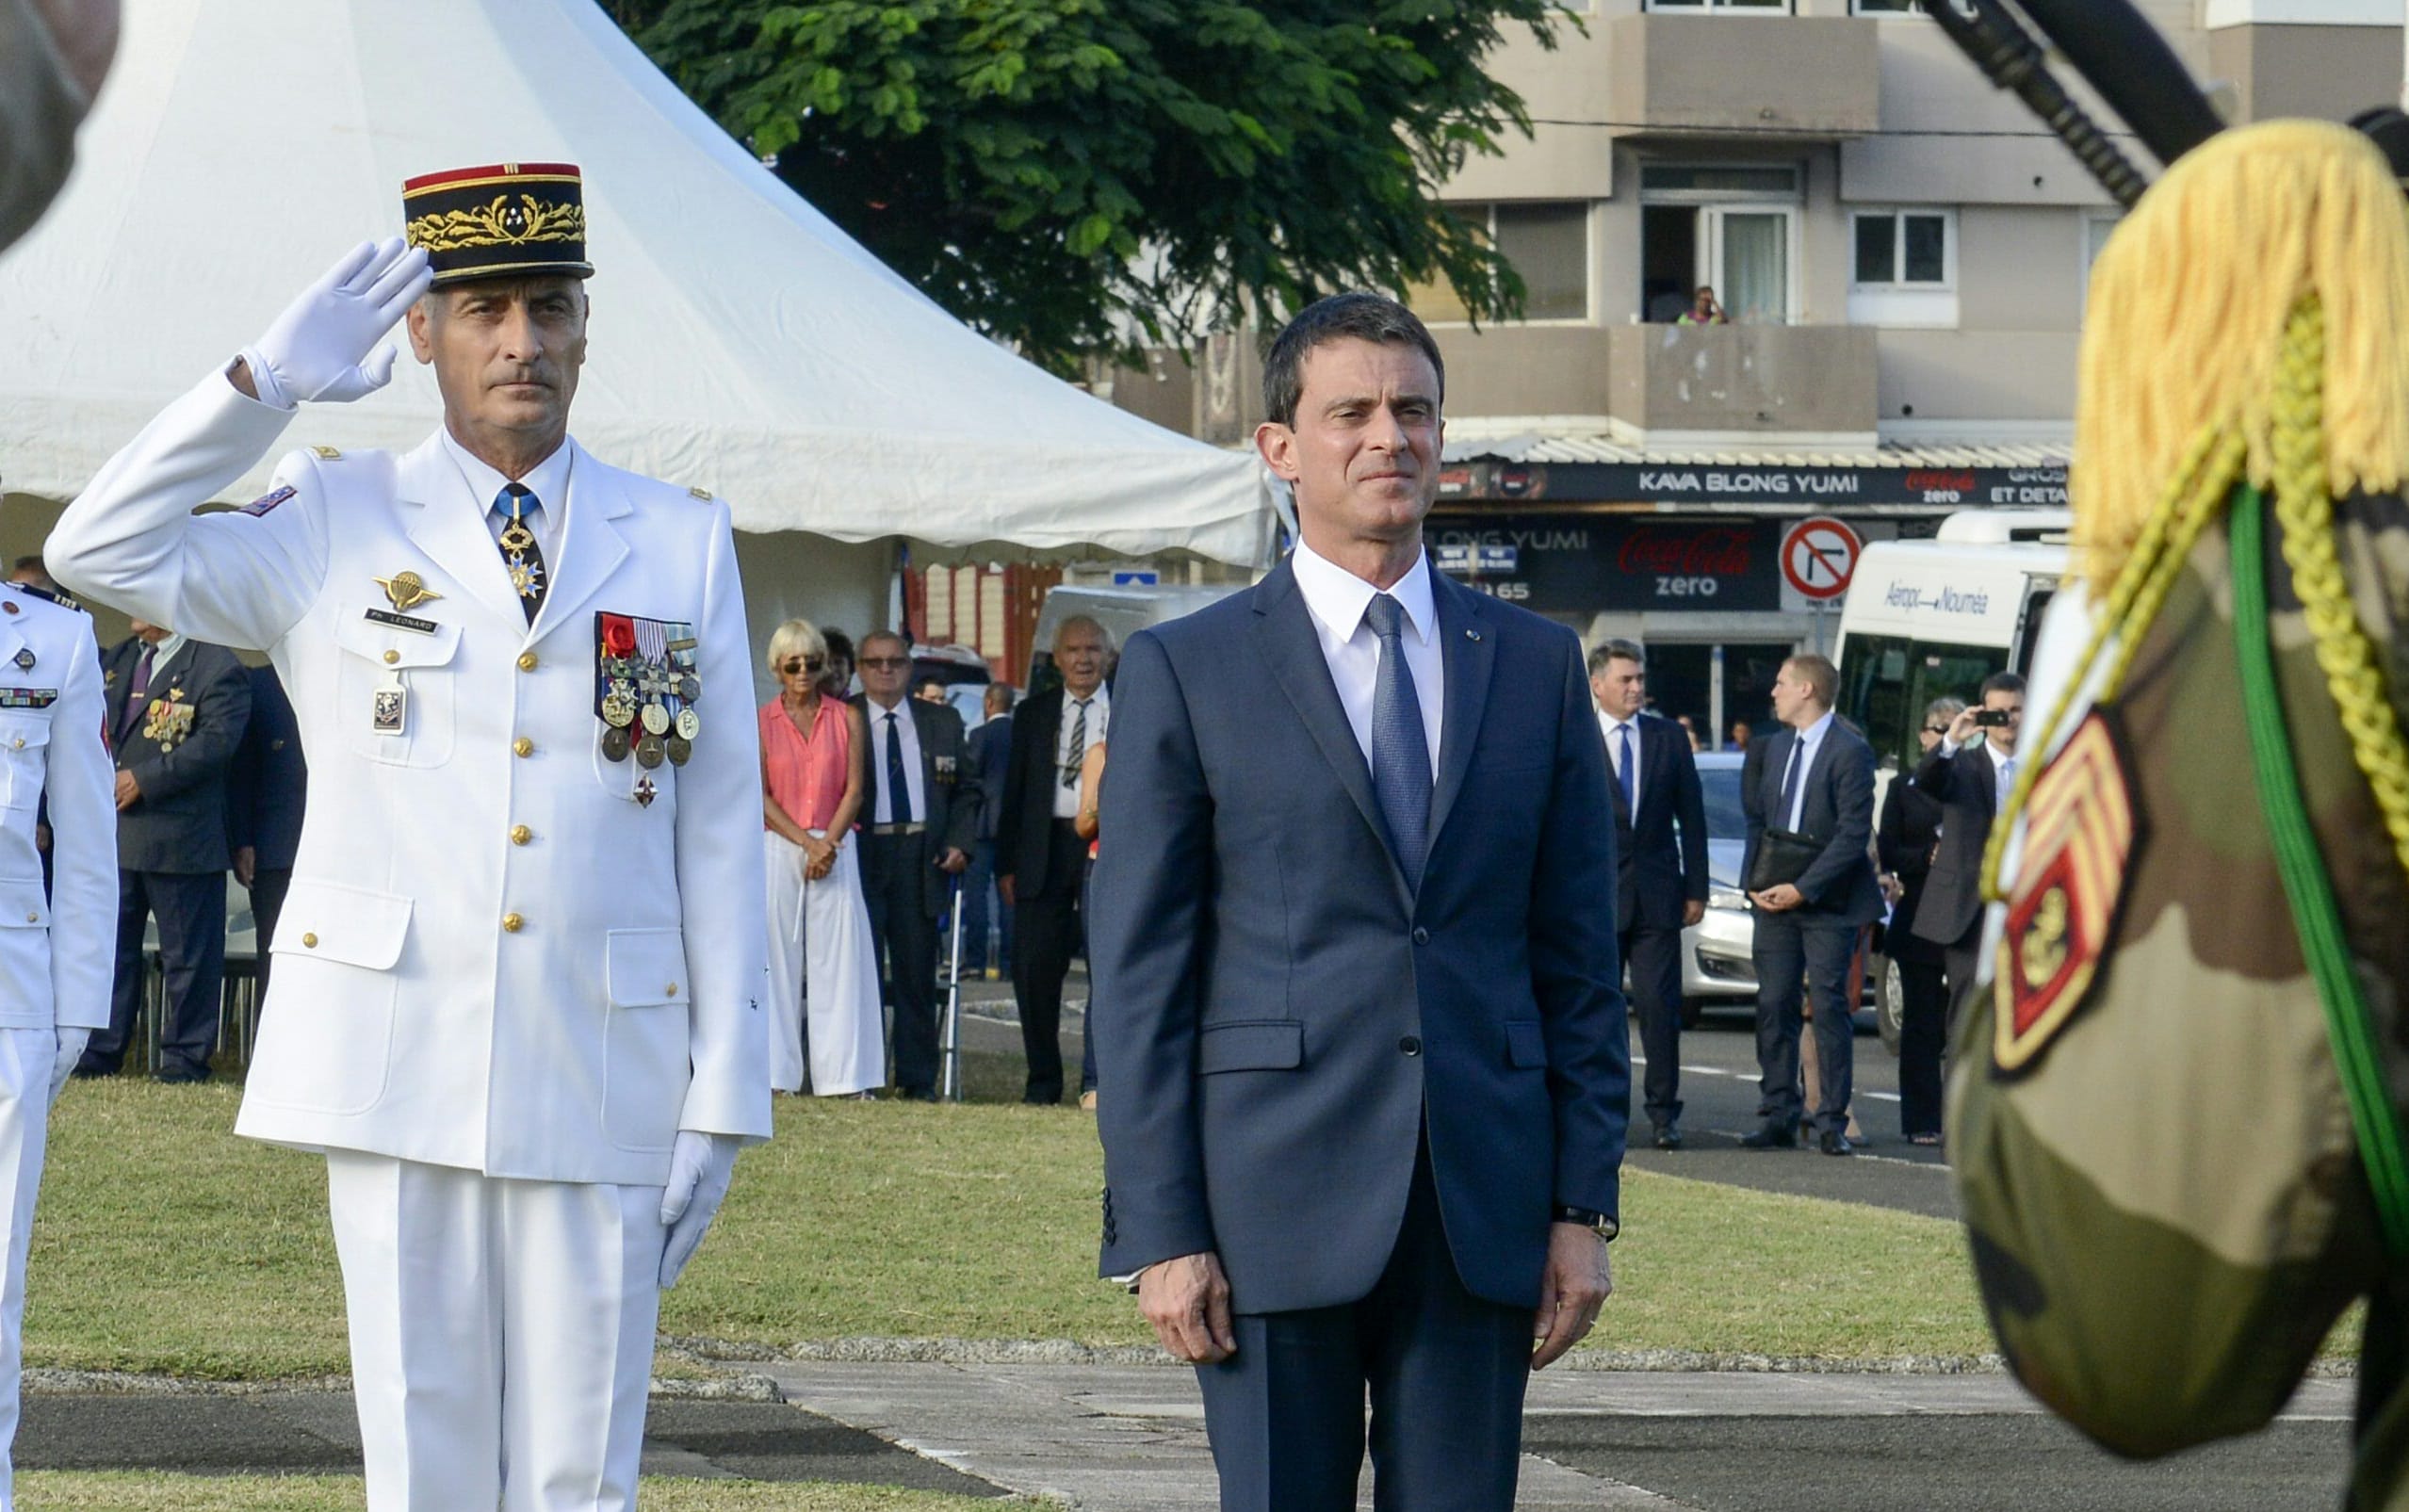 French Commander of the French Armed Forces in New Caledonia, Major General Philippe Leonard, (L) and French Prime Minister Manuel Valls salute at the place Bir-Hakeim in Noumea during a wreath lane ceremony at the wall memorial on April 29, 2016.